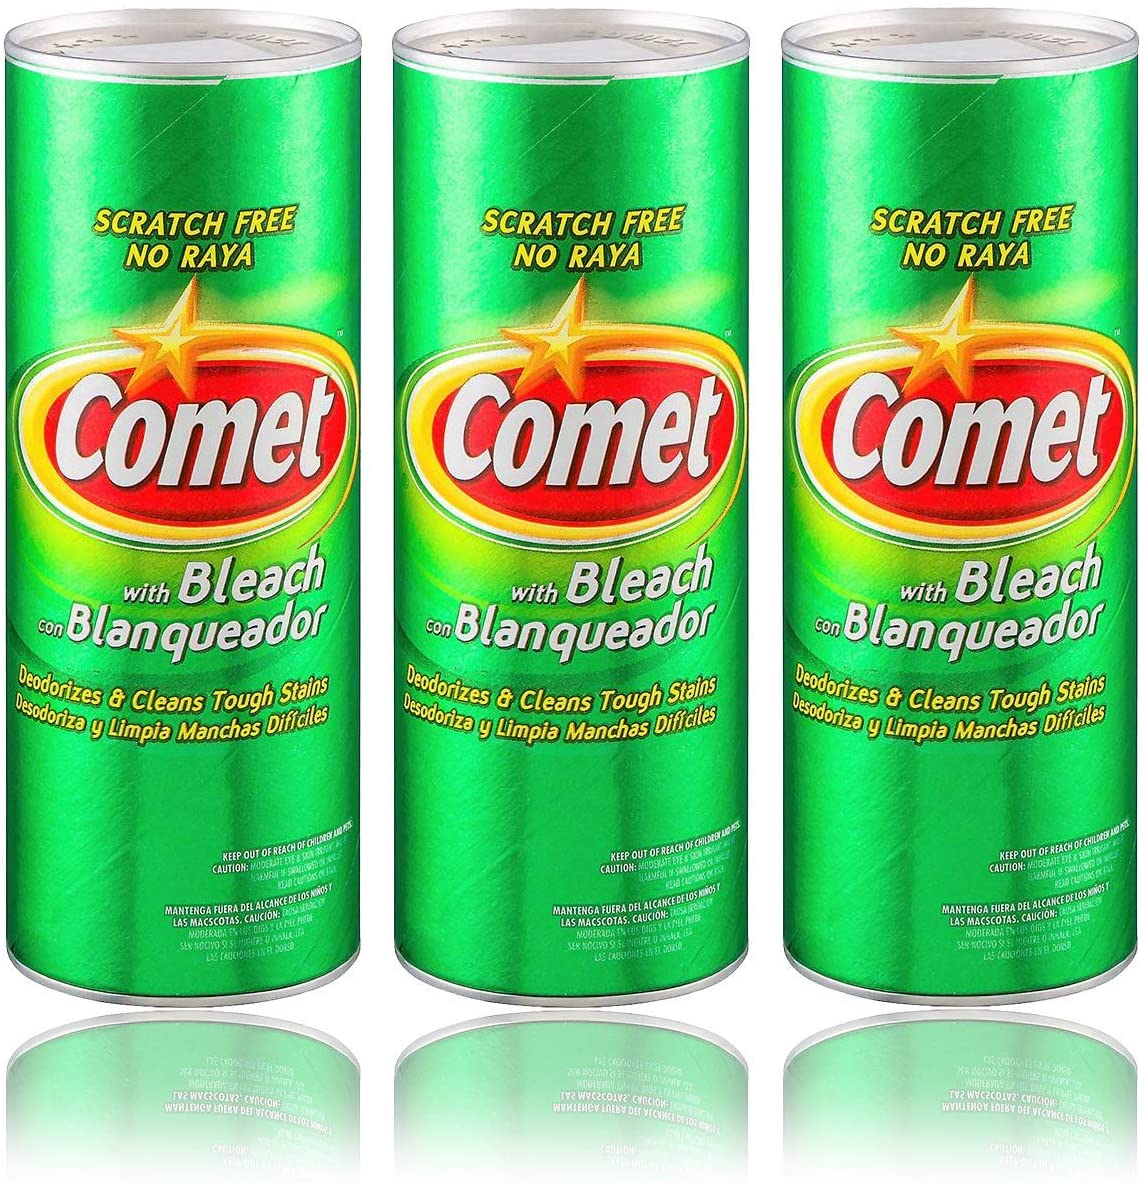 Comet Cleaner with Bleach Powder 21-Ounces | Scratch-Free | (3-Pack)